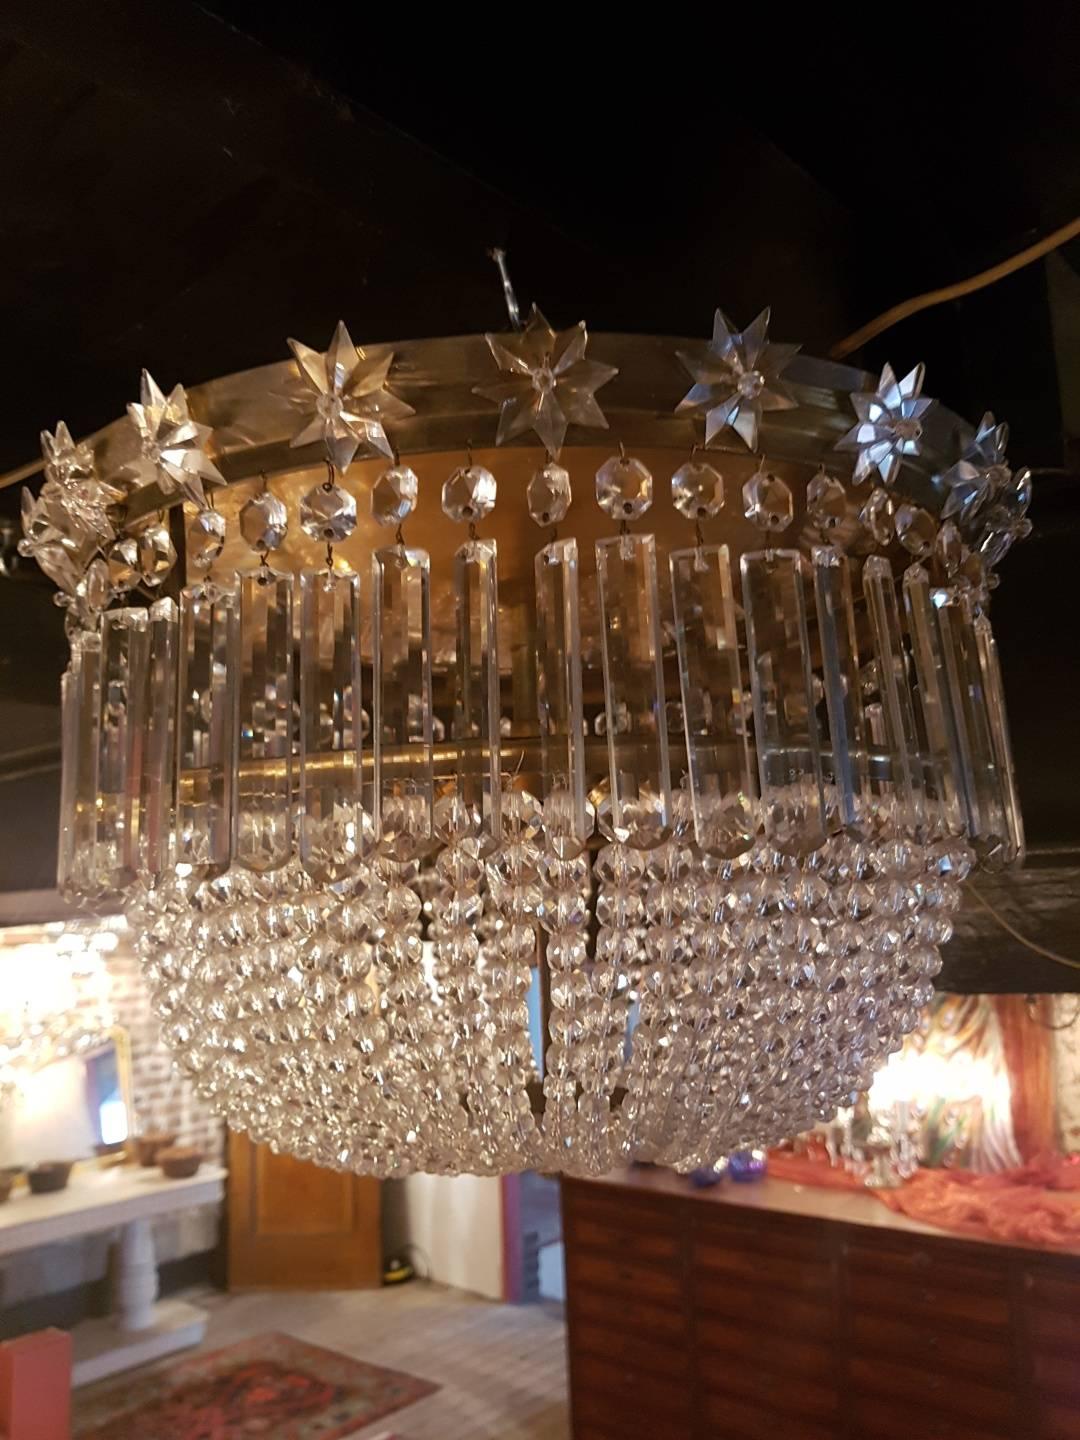 Beautiful French Plafonniere with beads of crystal. The top ring is decorated with star-shaped crystal ornaments and hanging long pendeloques. Inside the plafonniere there are four lights. At the bottom a large star-shaped crystal ornament secured